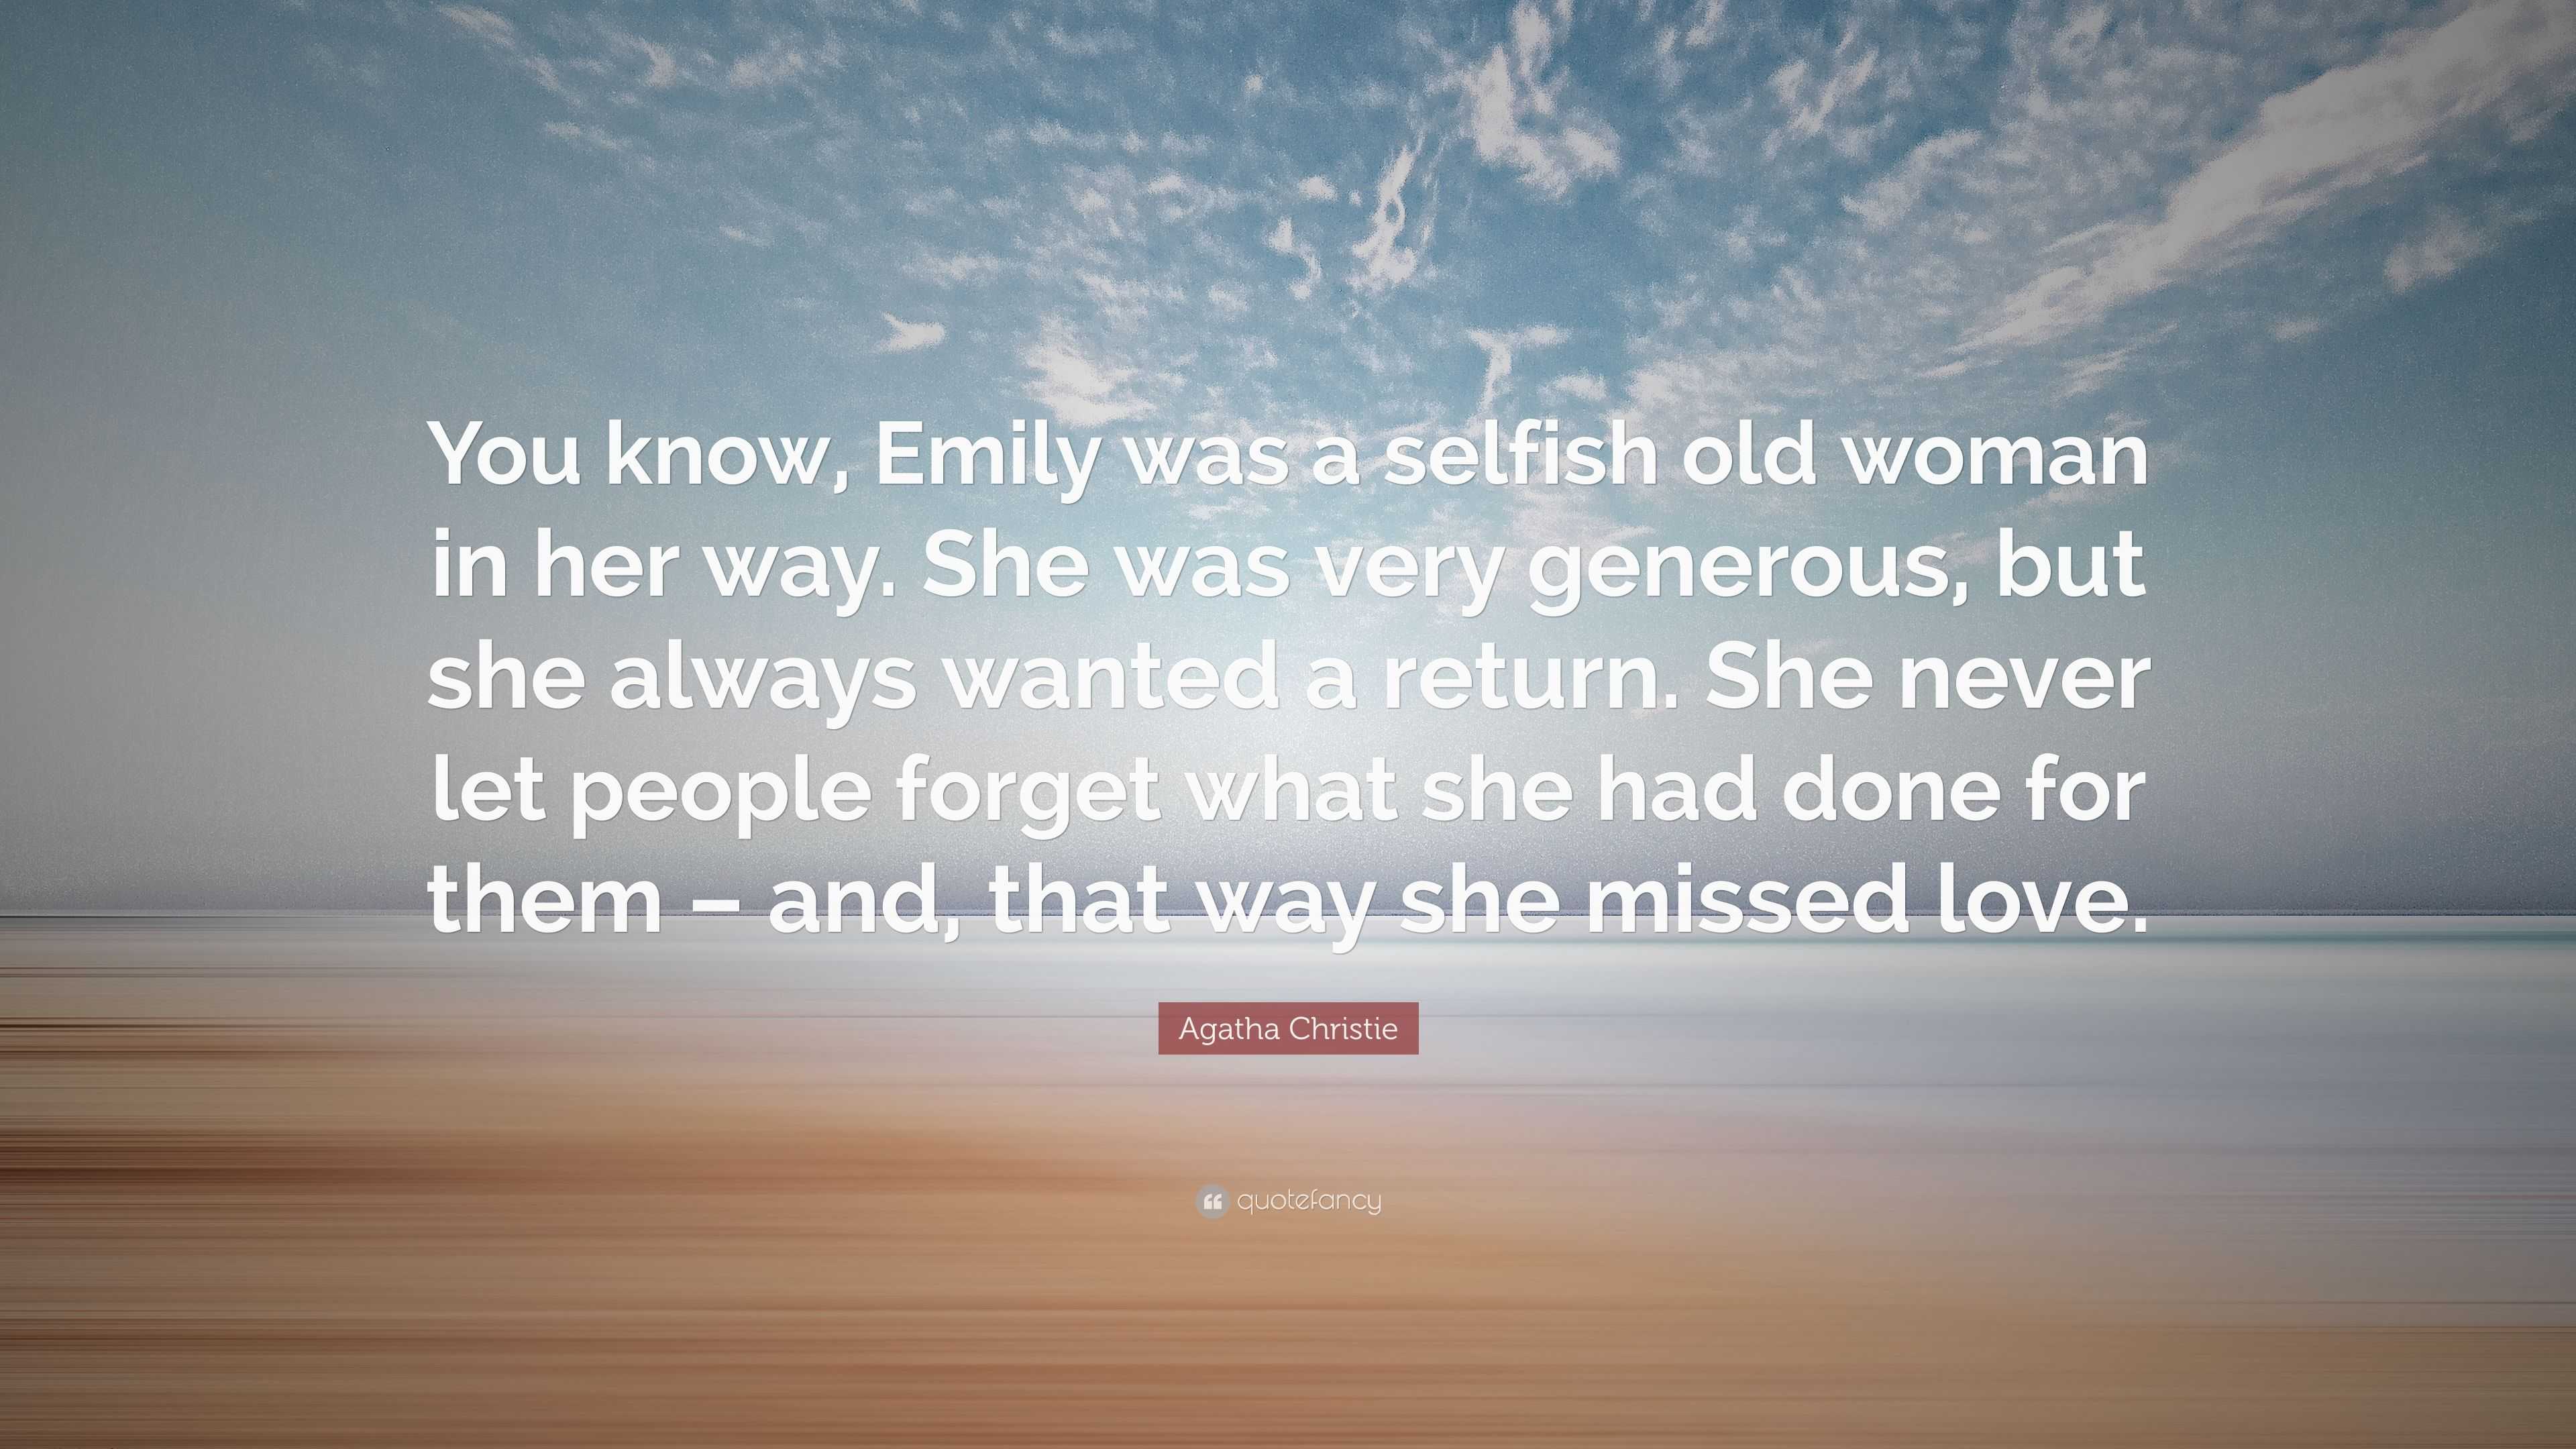 Agatha Christie Quote: “You know, Emily was a selfish old woman in her ...